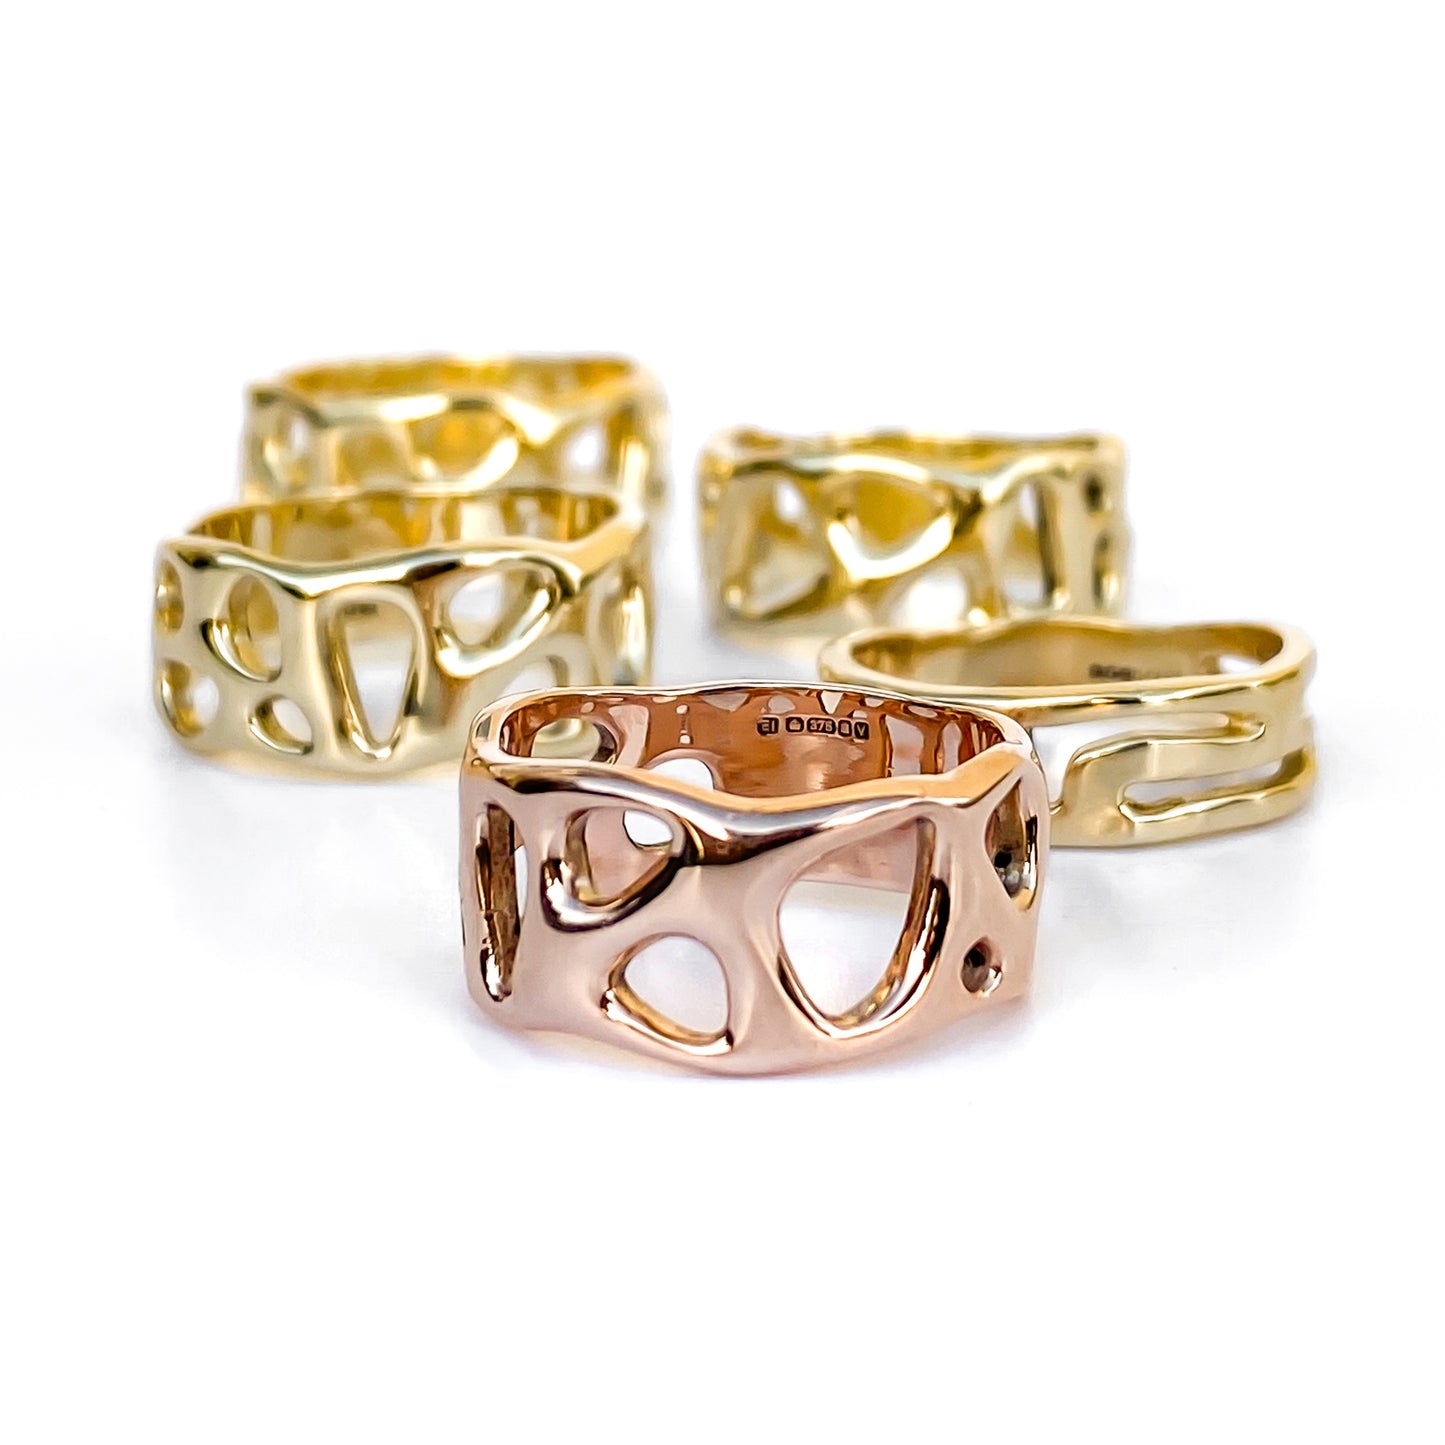 Gold Infinity Ring - Yellow, Rose or White Gold